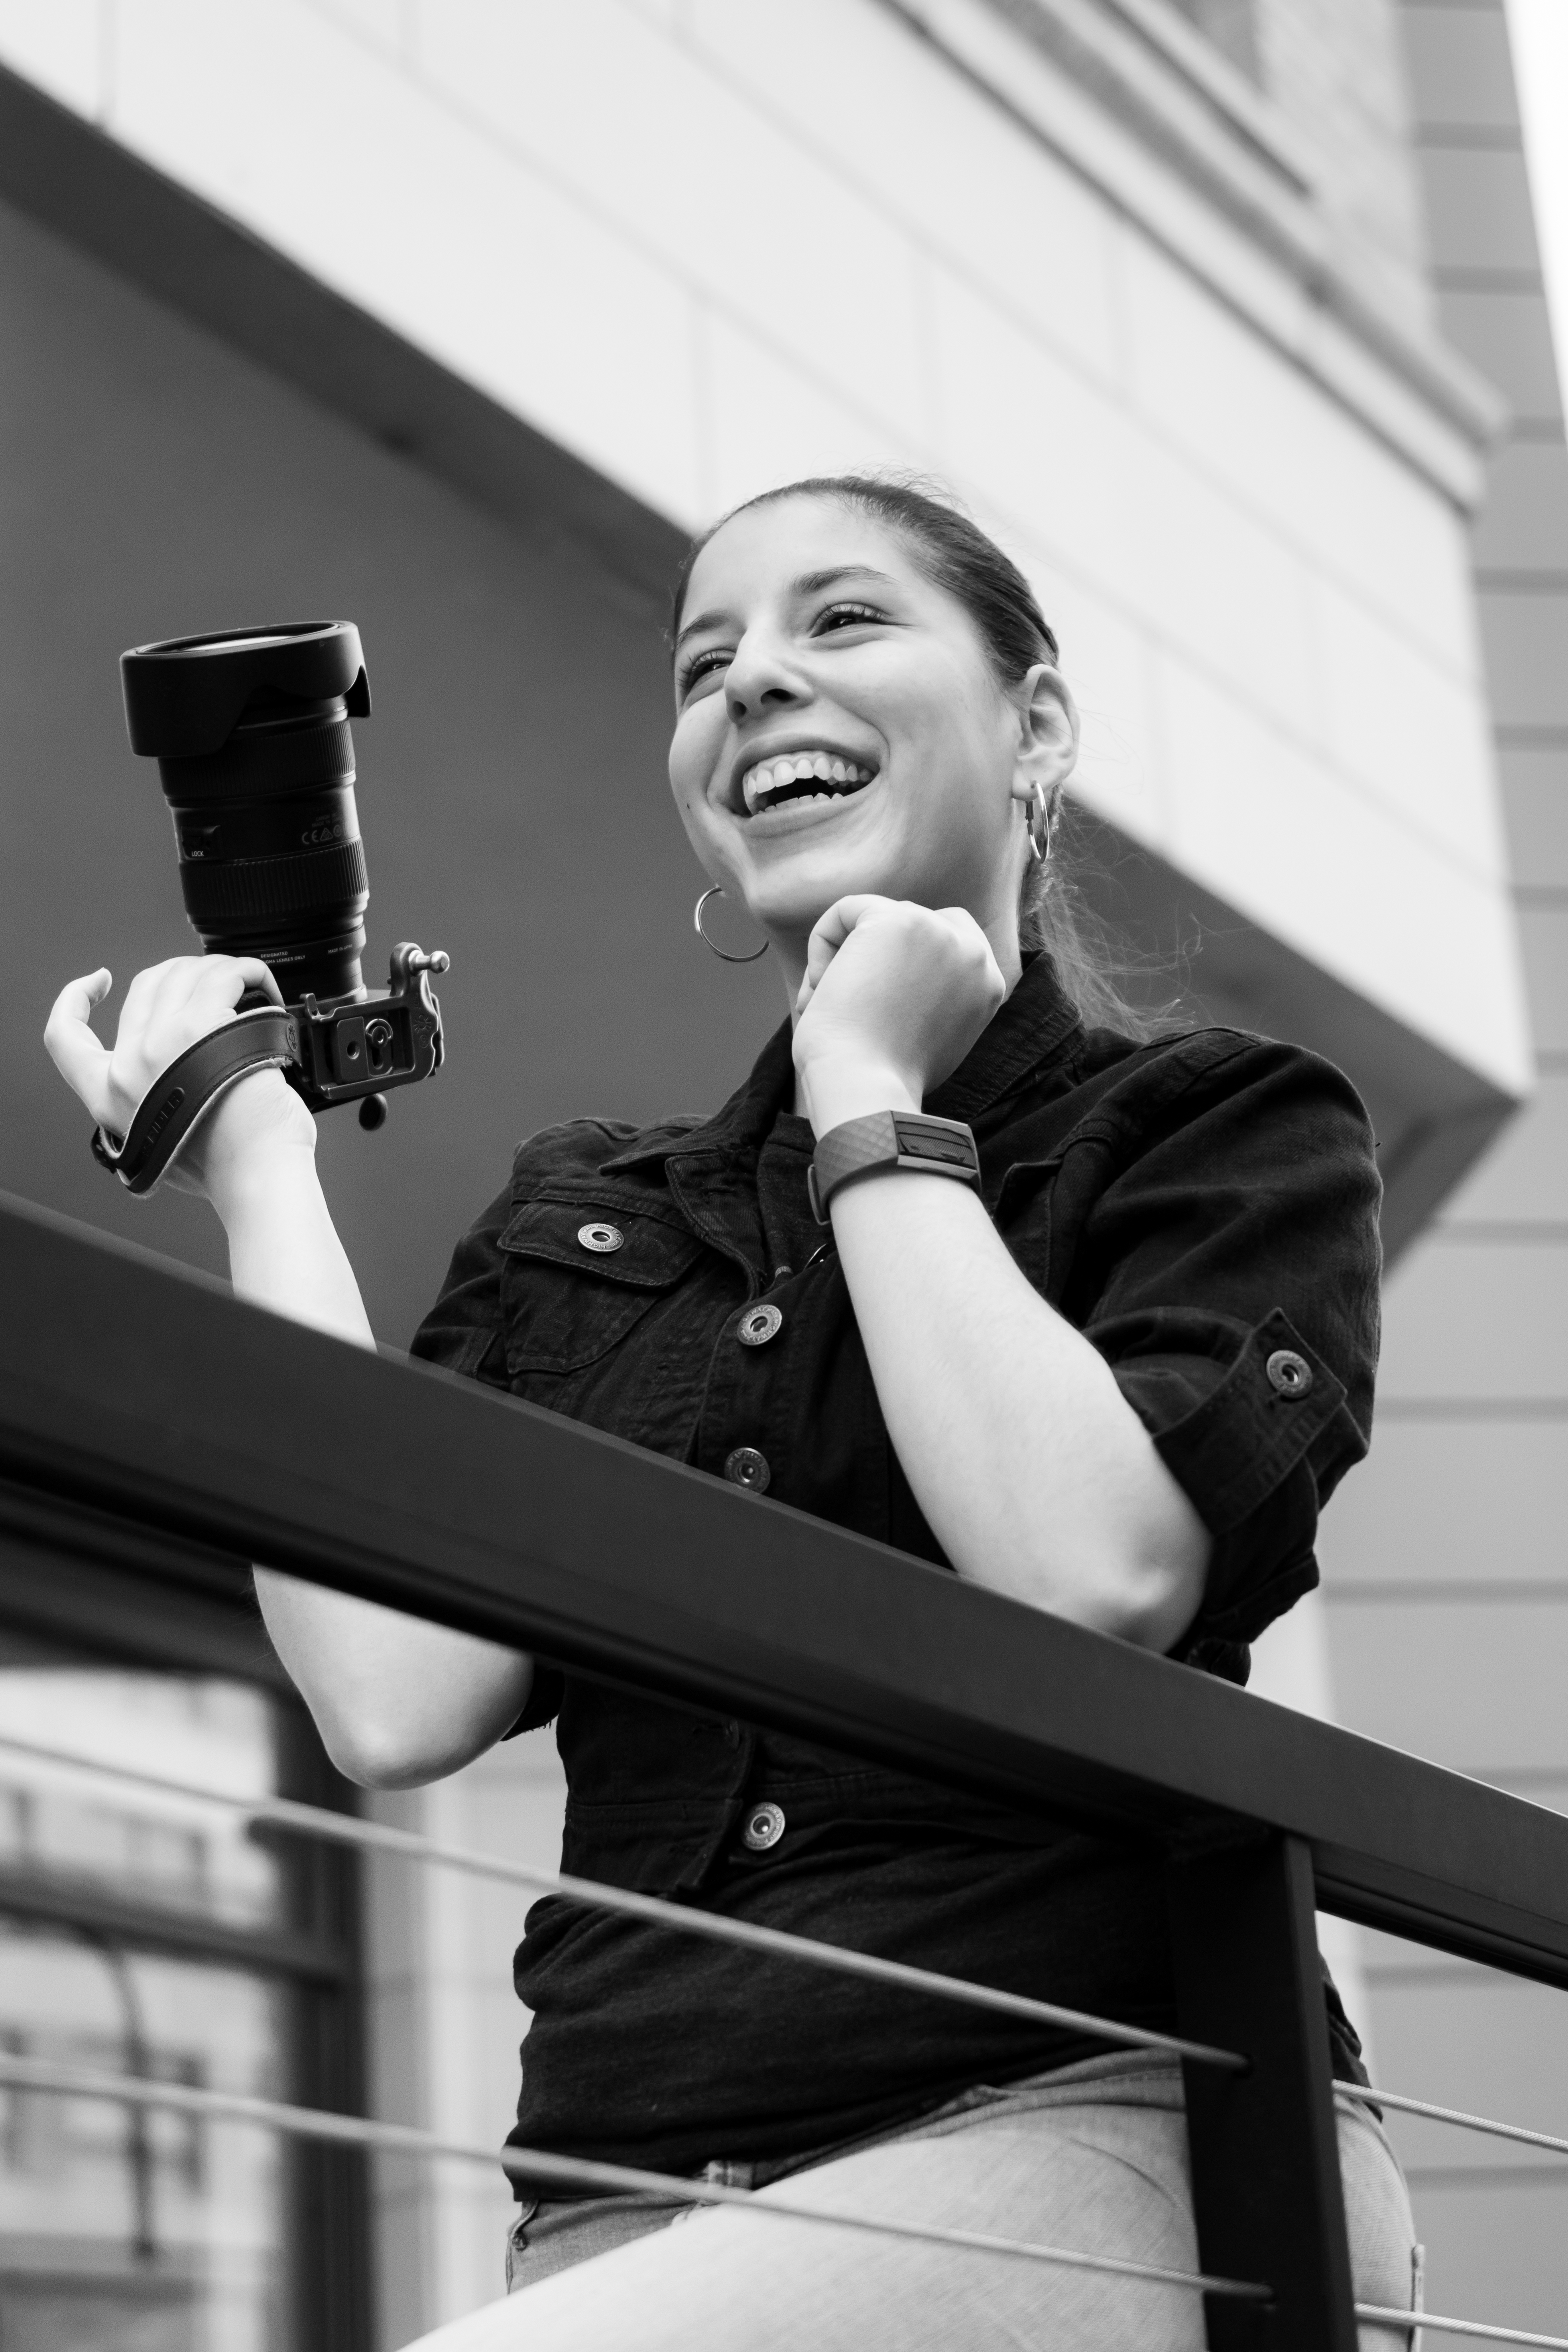 a photo of a woman holding a camera and laughing